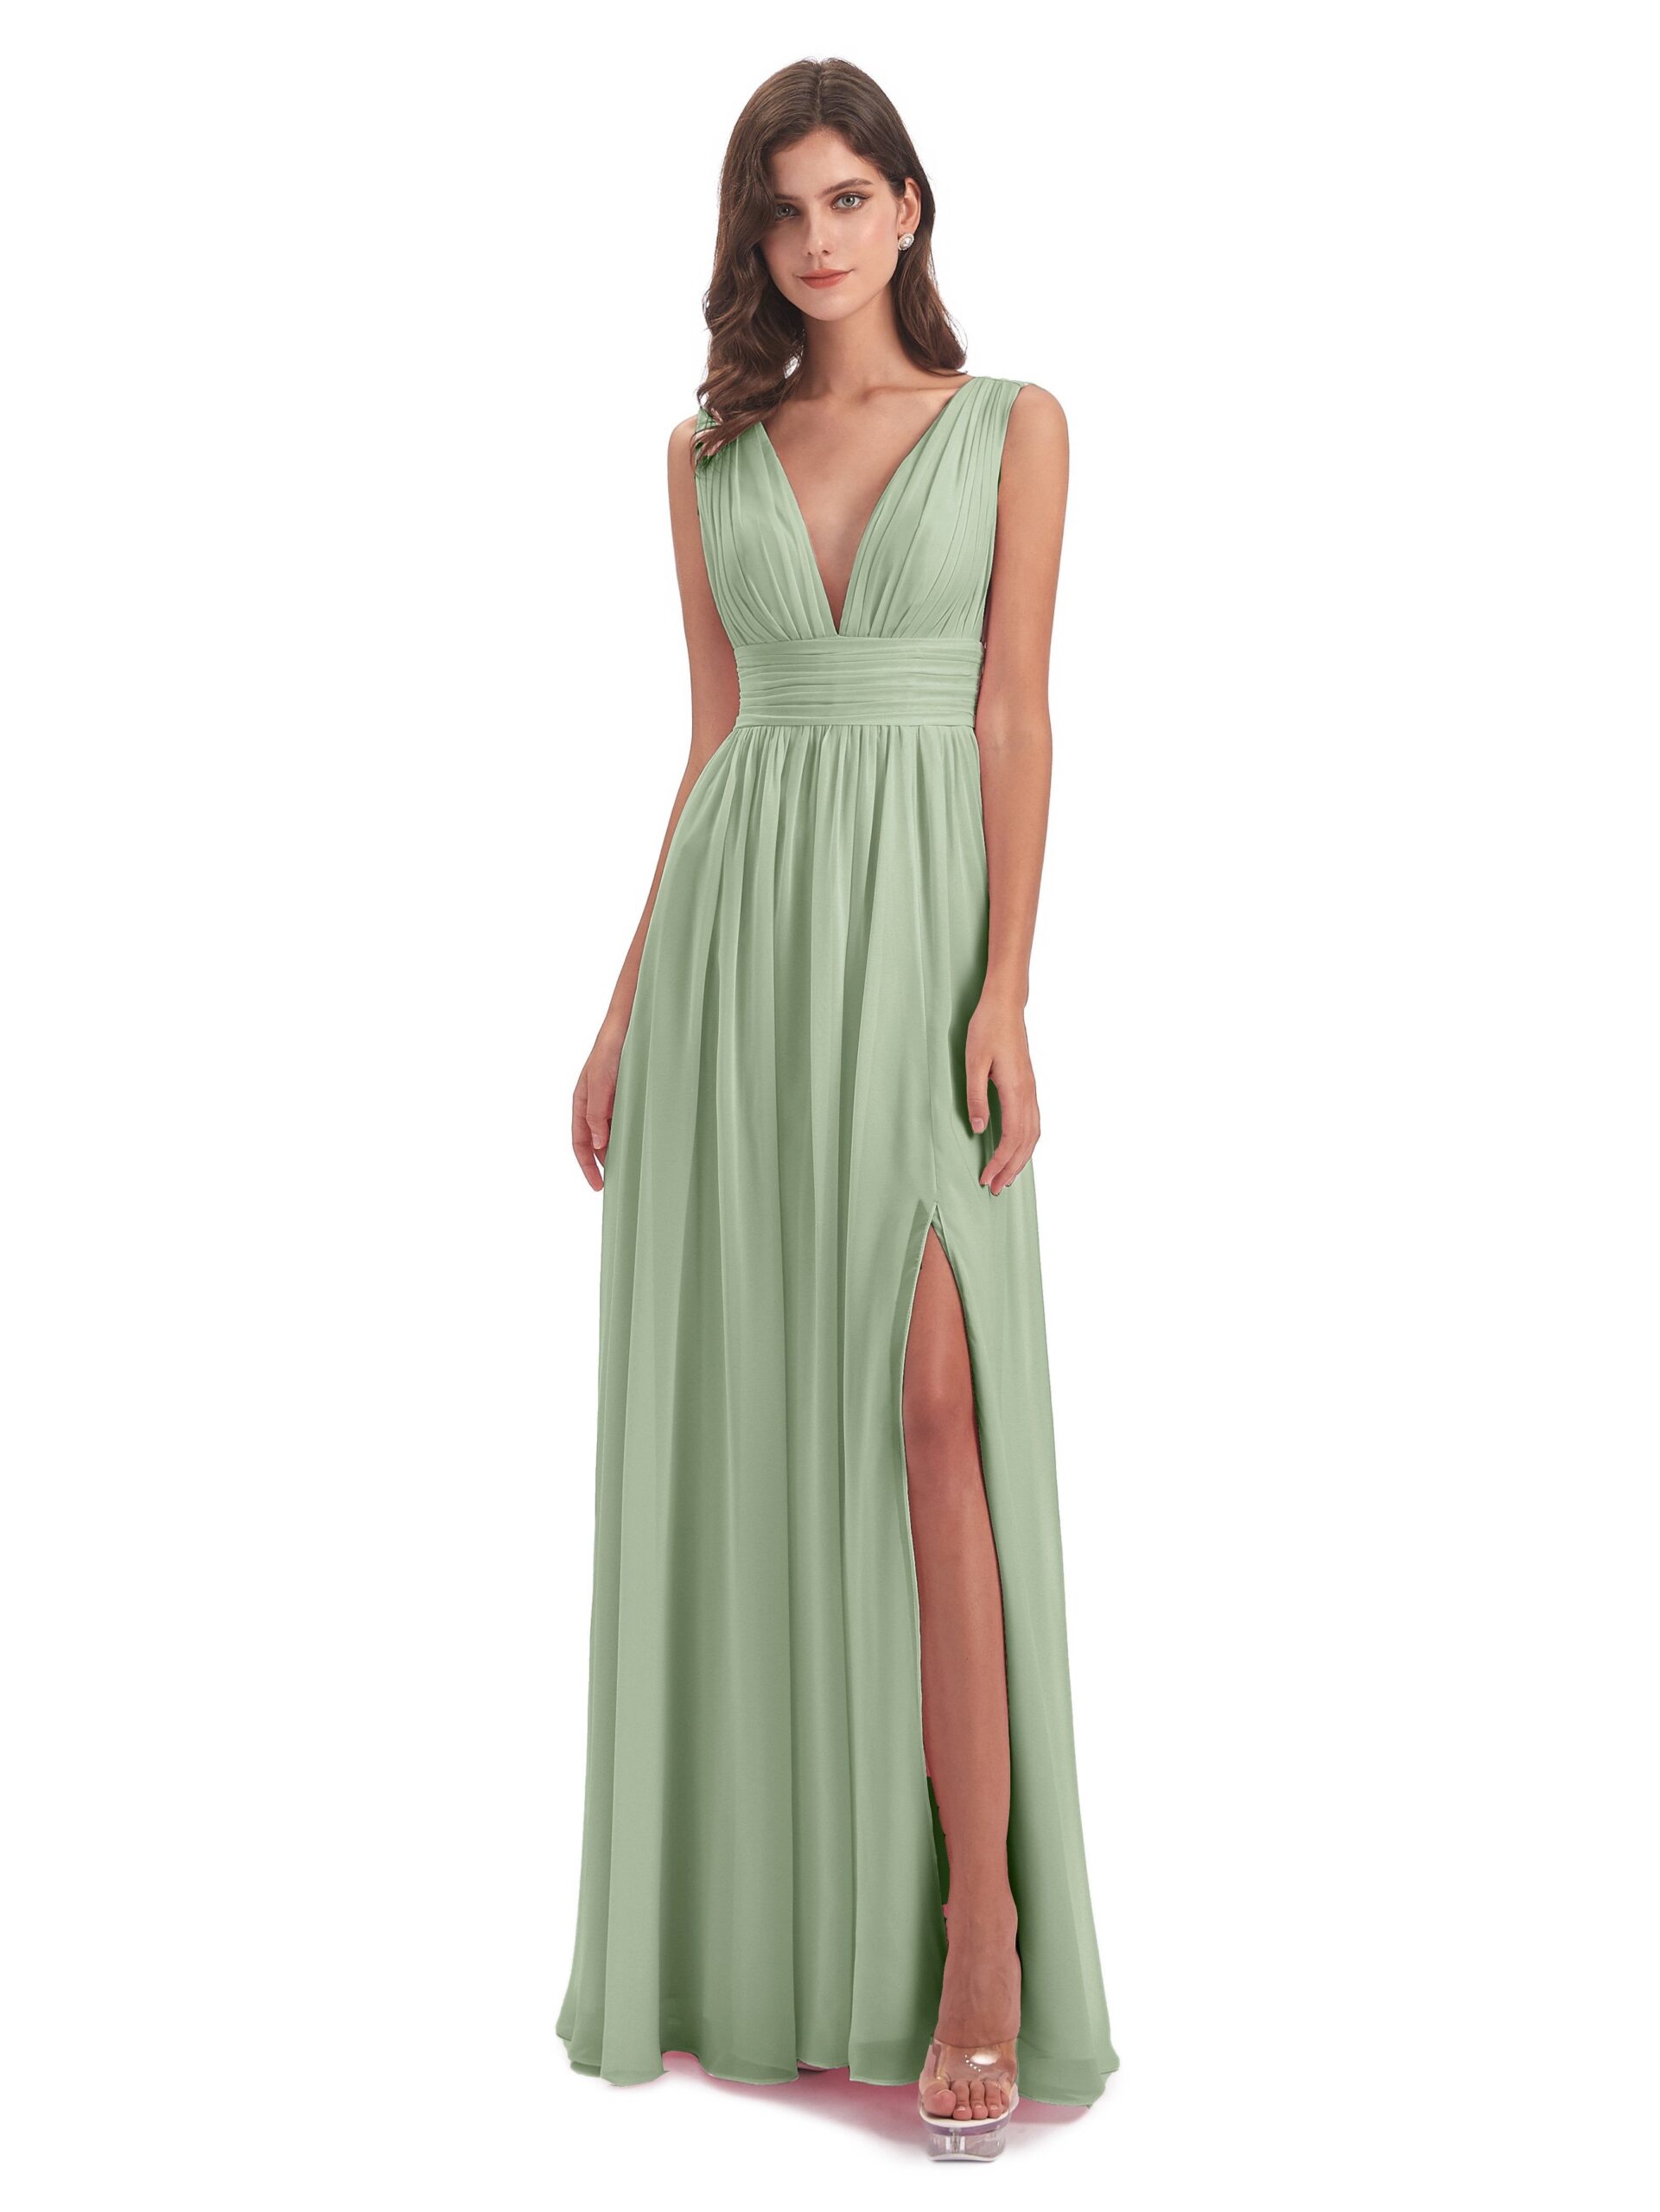 Look beautiful and gorgeous in 
chiffon bridesmaid dresses